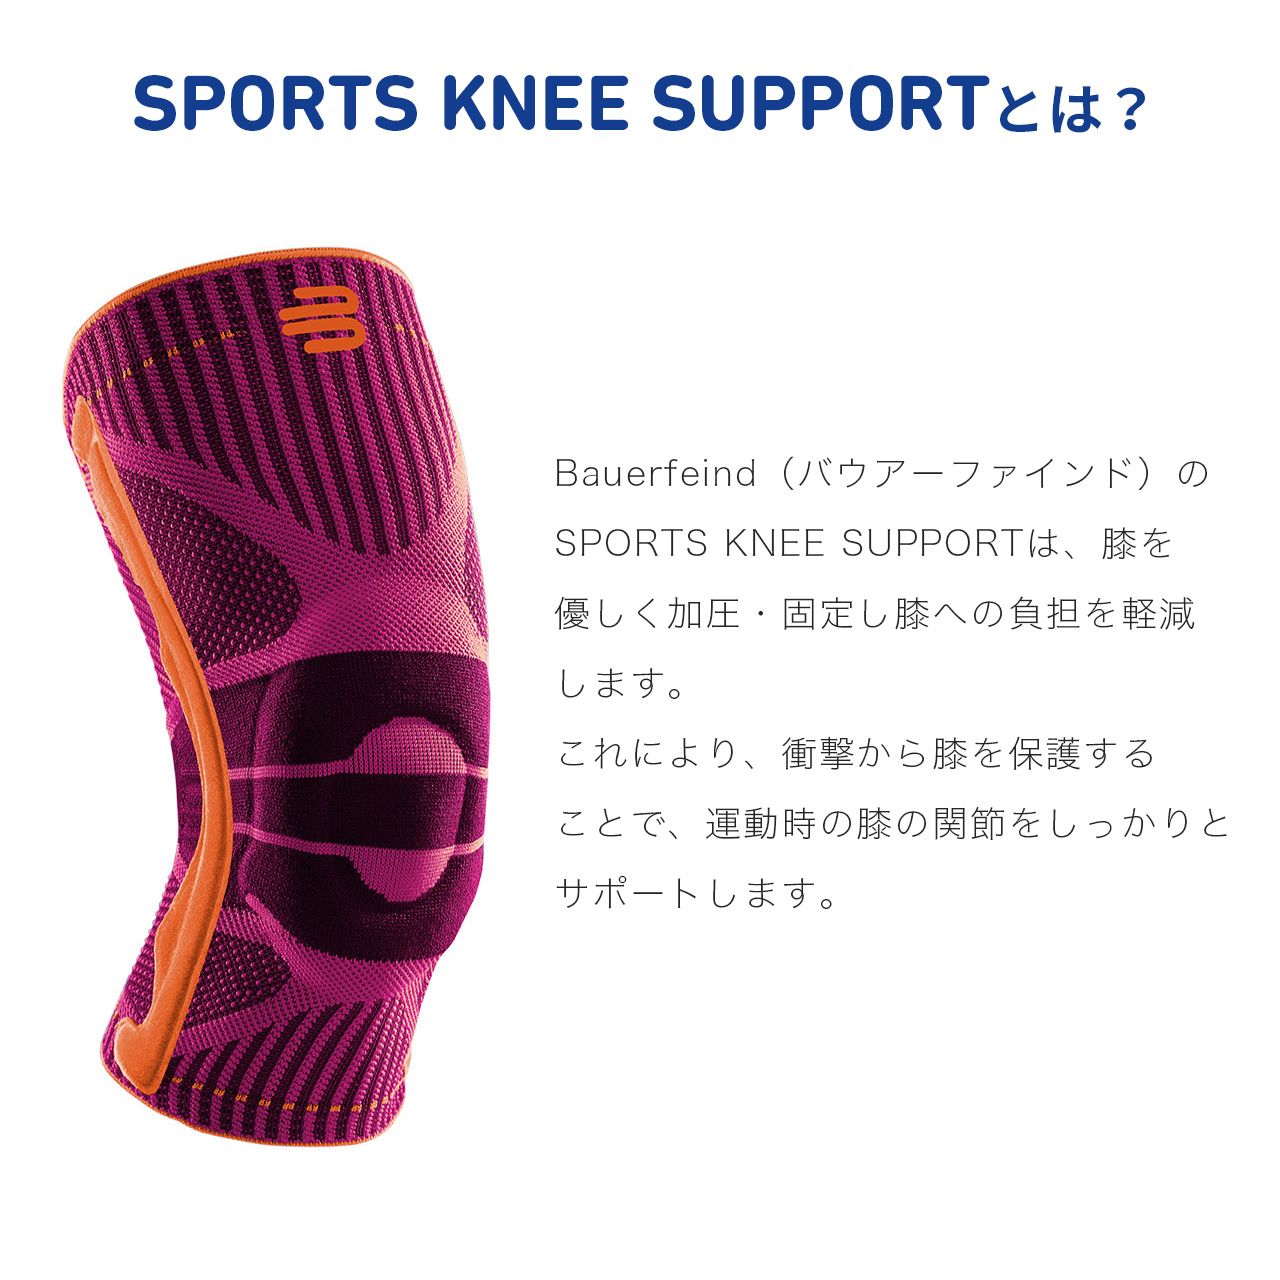 Bauerfeind バウアーファインド 膝用スポーツサポーター Sports Knee Support 半月板 前十字靭帯 加圧 コンプレッション 洗濯可 通気性抜群 ムレない Iconnect Zm